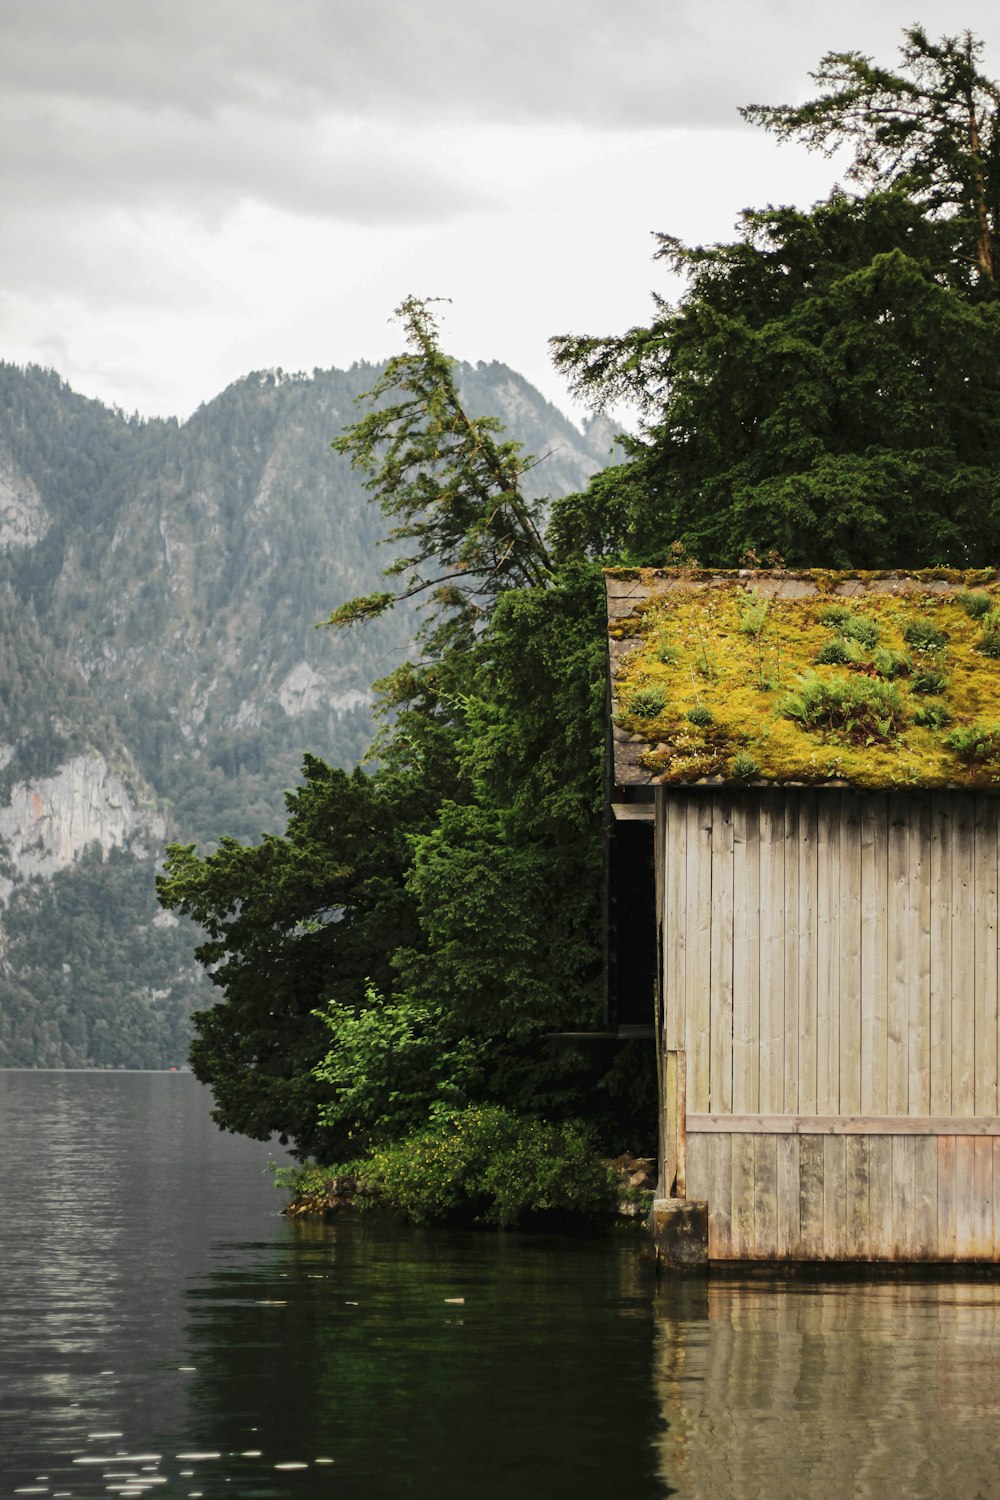 a wooden building next to a body of water with trees and mountains in the background